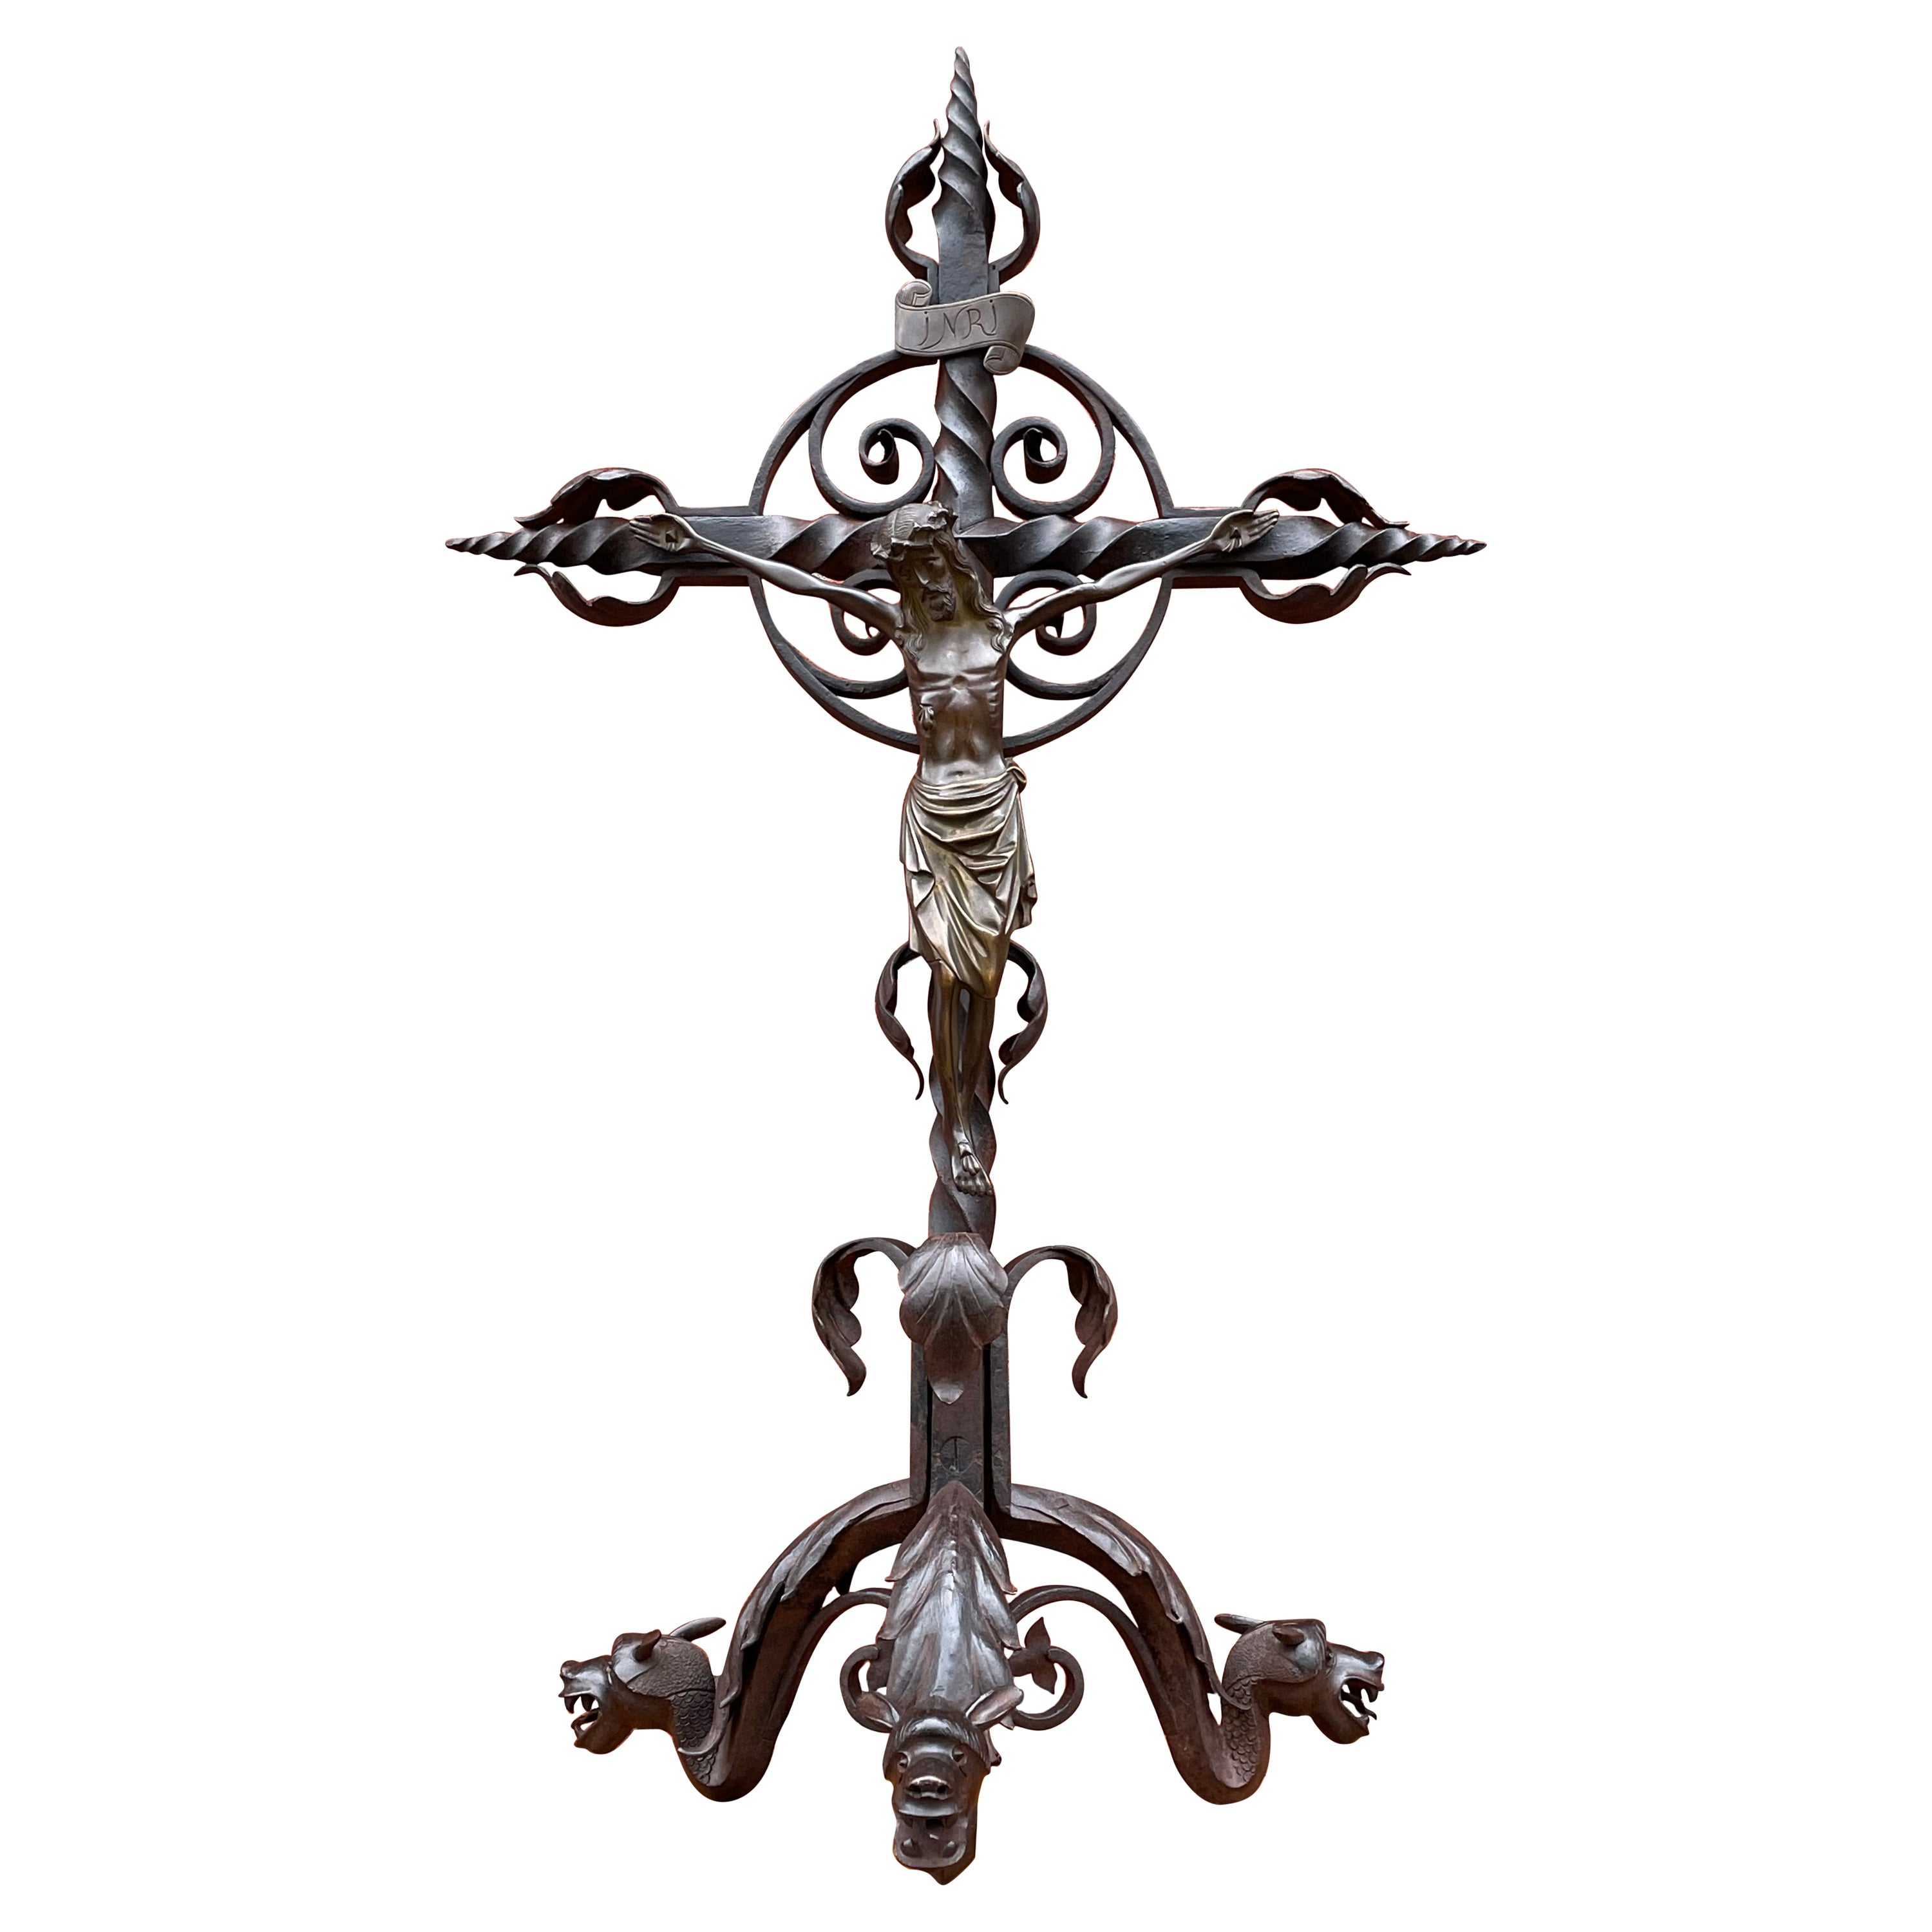 Gothic Dragons Base Wrought Iron Altar Crucifix with Bronze Sculpture of Christ